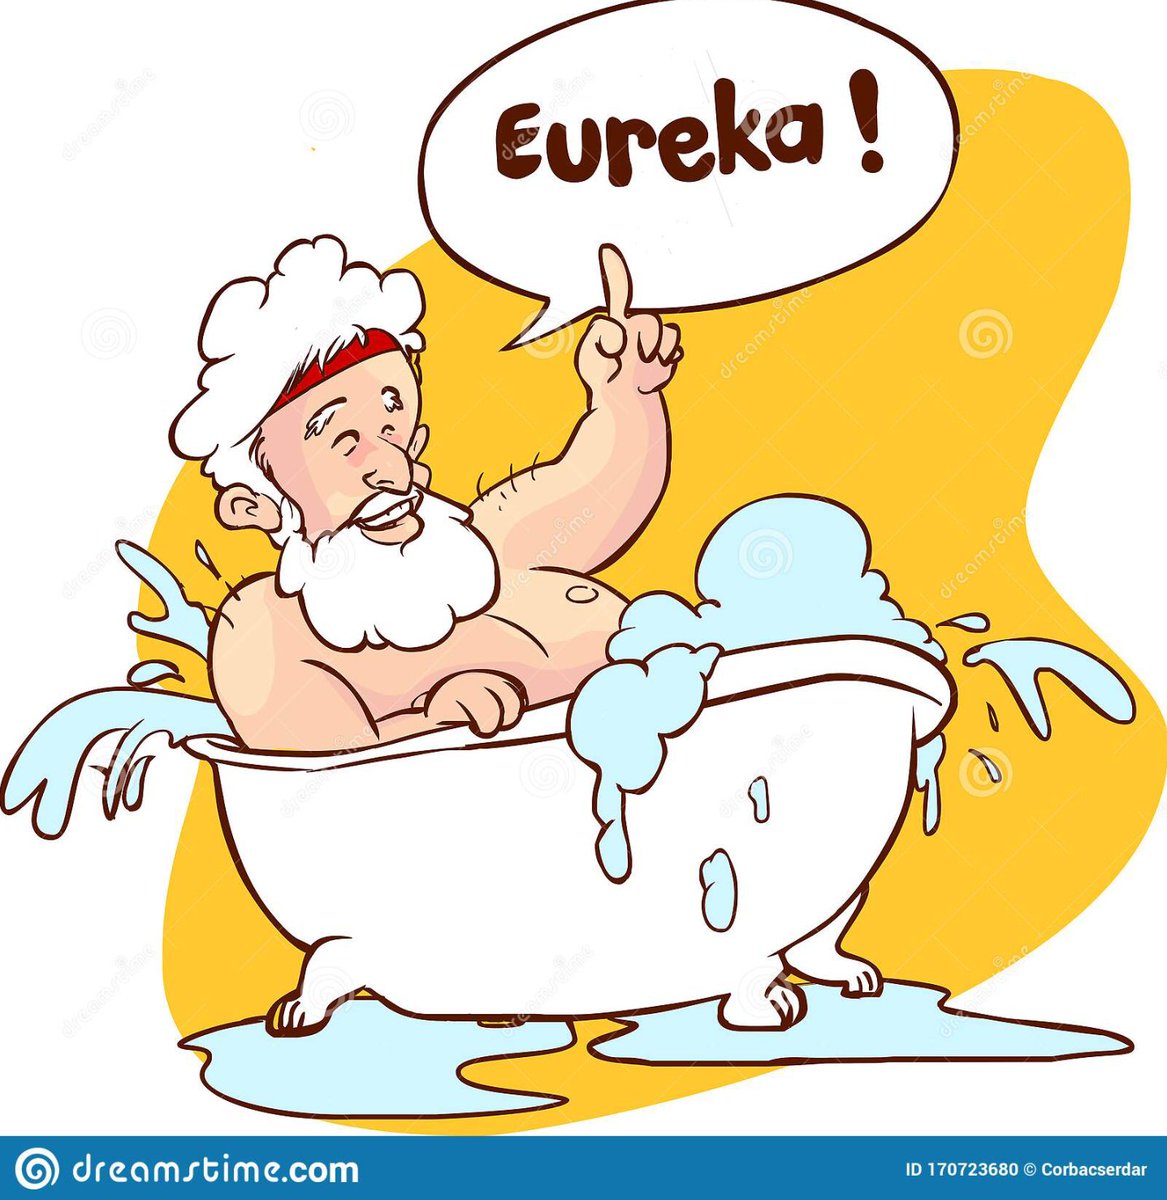 DAY 14 - The most memorable moment in science: when a naked weird dude was running through the streets of Syracuse yelling "Eureka" because he had just thought of one of fluid mechanics fundamentals: Archimede's principle.